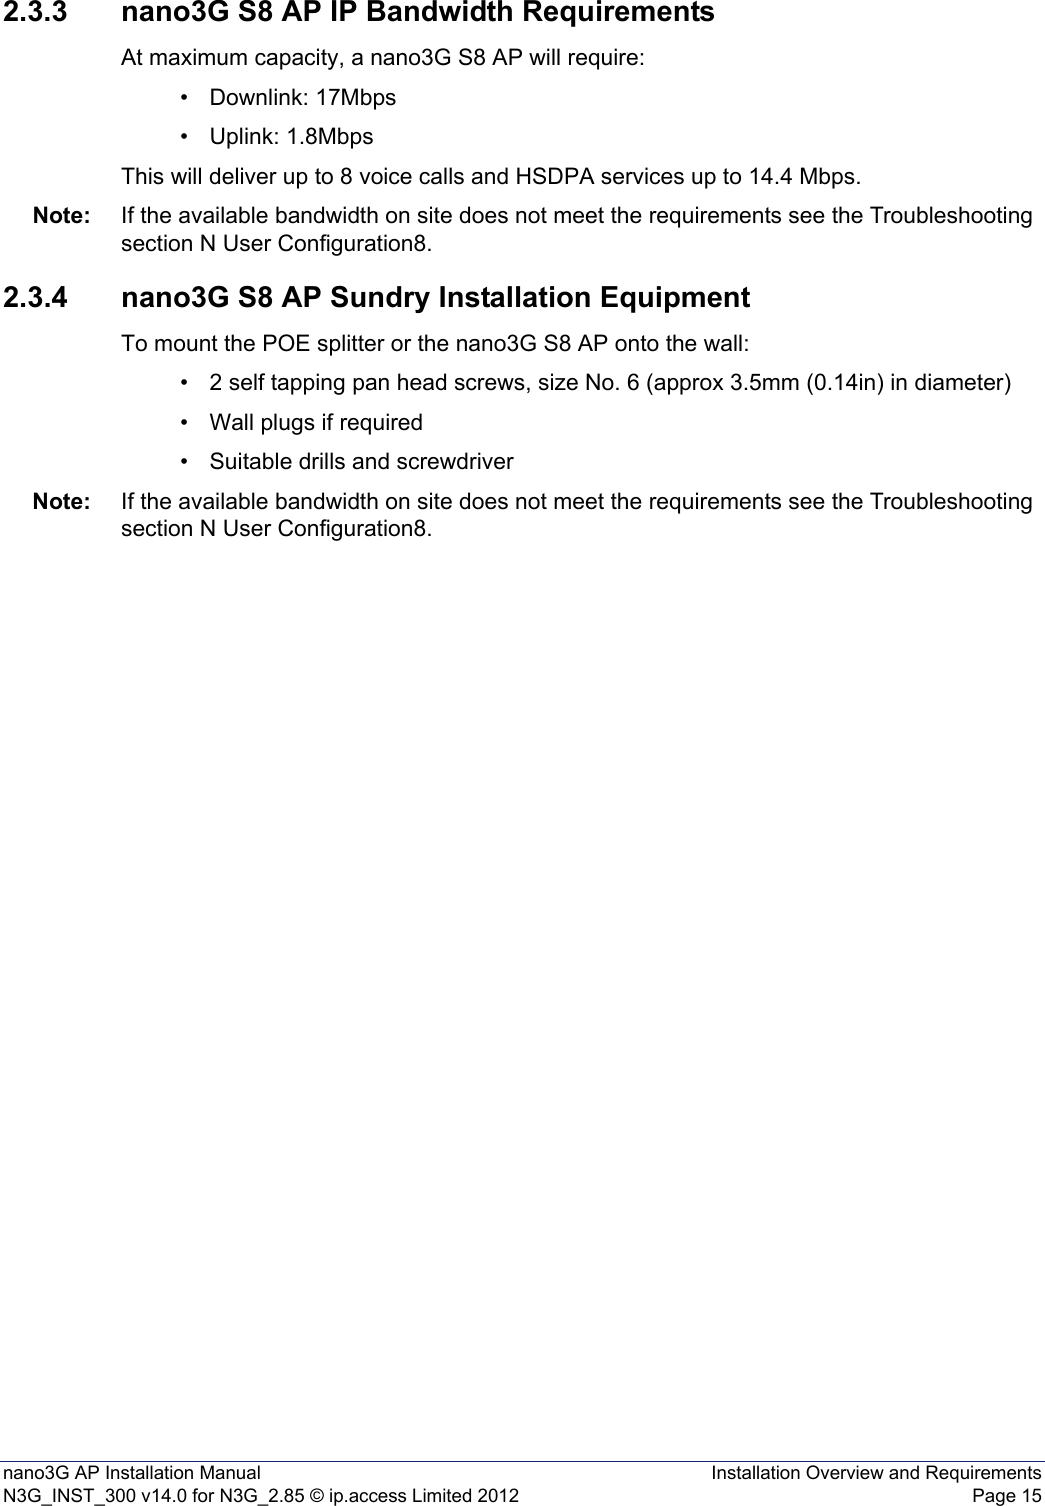 nano3G AP Installation Manual Installation Overview and RequirementsN3G_INST_300 v14.0 for N3G_2.85 © ip.access Limited 2012 Page 152.3.3 nano3G S8 AP IP Bandwidth RequirementsAt maximum capacity, a nano3G S8 AP will require:• Downlink: 17Mbps• Uplink: 1.8MbpsThis will deliver up to 8 voice calls and HSDPA services up to 14.4 Mbps.Note: If the available bandwidth on site does not meet the requirements see the Troubleshooting section N User Configuration8.2.3.4 nano3G S8 AP Sundry Installation EquipmentTo mount the POE splitter or the nano3G S8 AP onto the wall:• 2 self tapping pan head screws, size No. 6 (approx 3.5mm (0.14in) in diameter)• Wall plugs if required• Suitable drills and screwdriverNote: If the available bandwidth on site does not meet the requirements see the Troubleshooting section N User Configuration8.